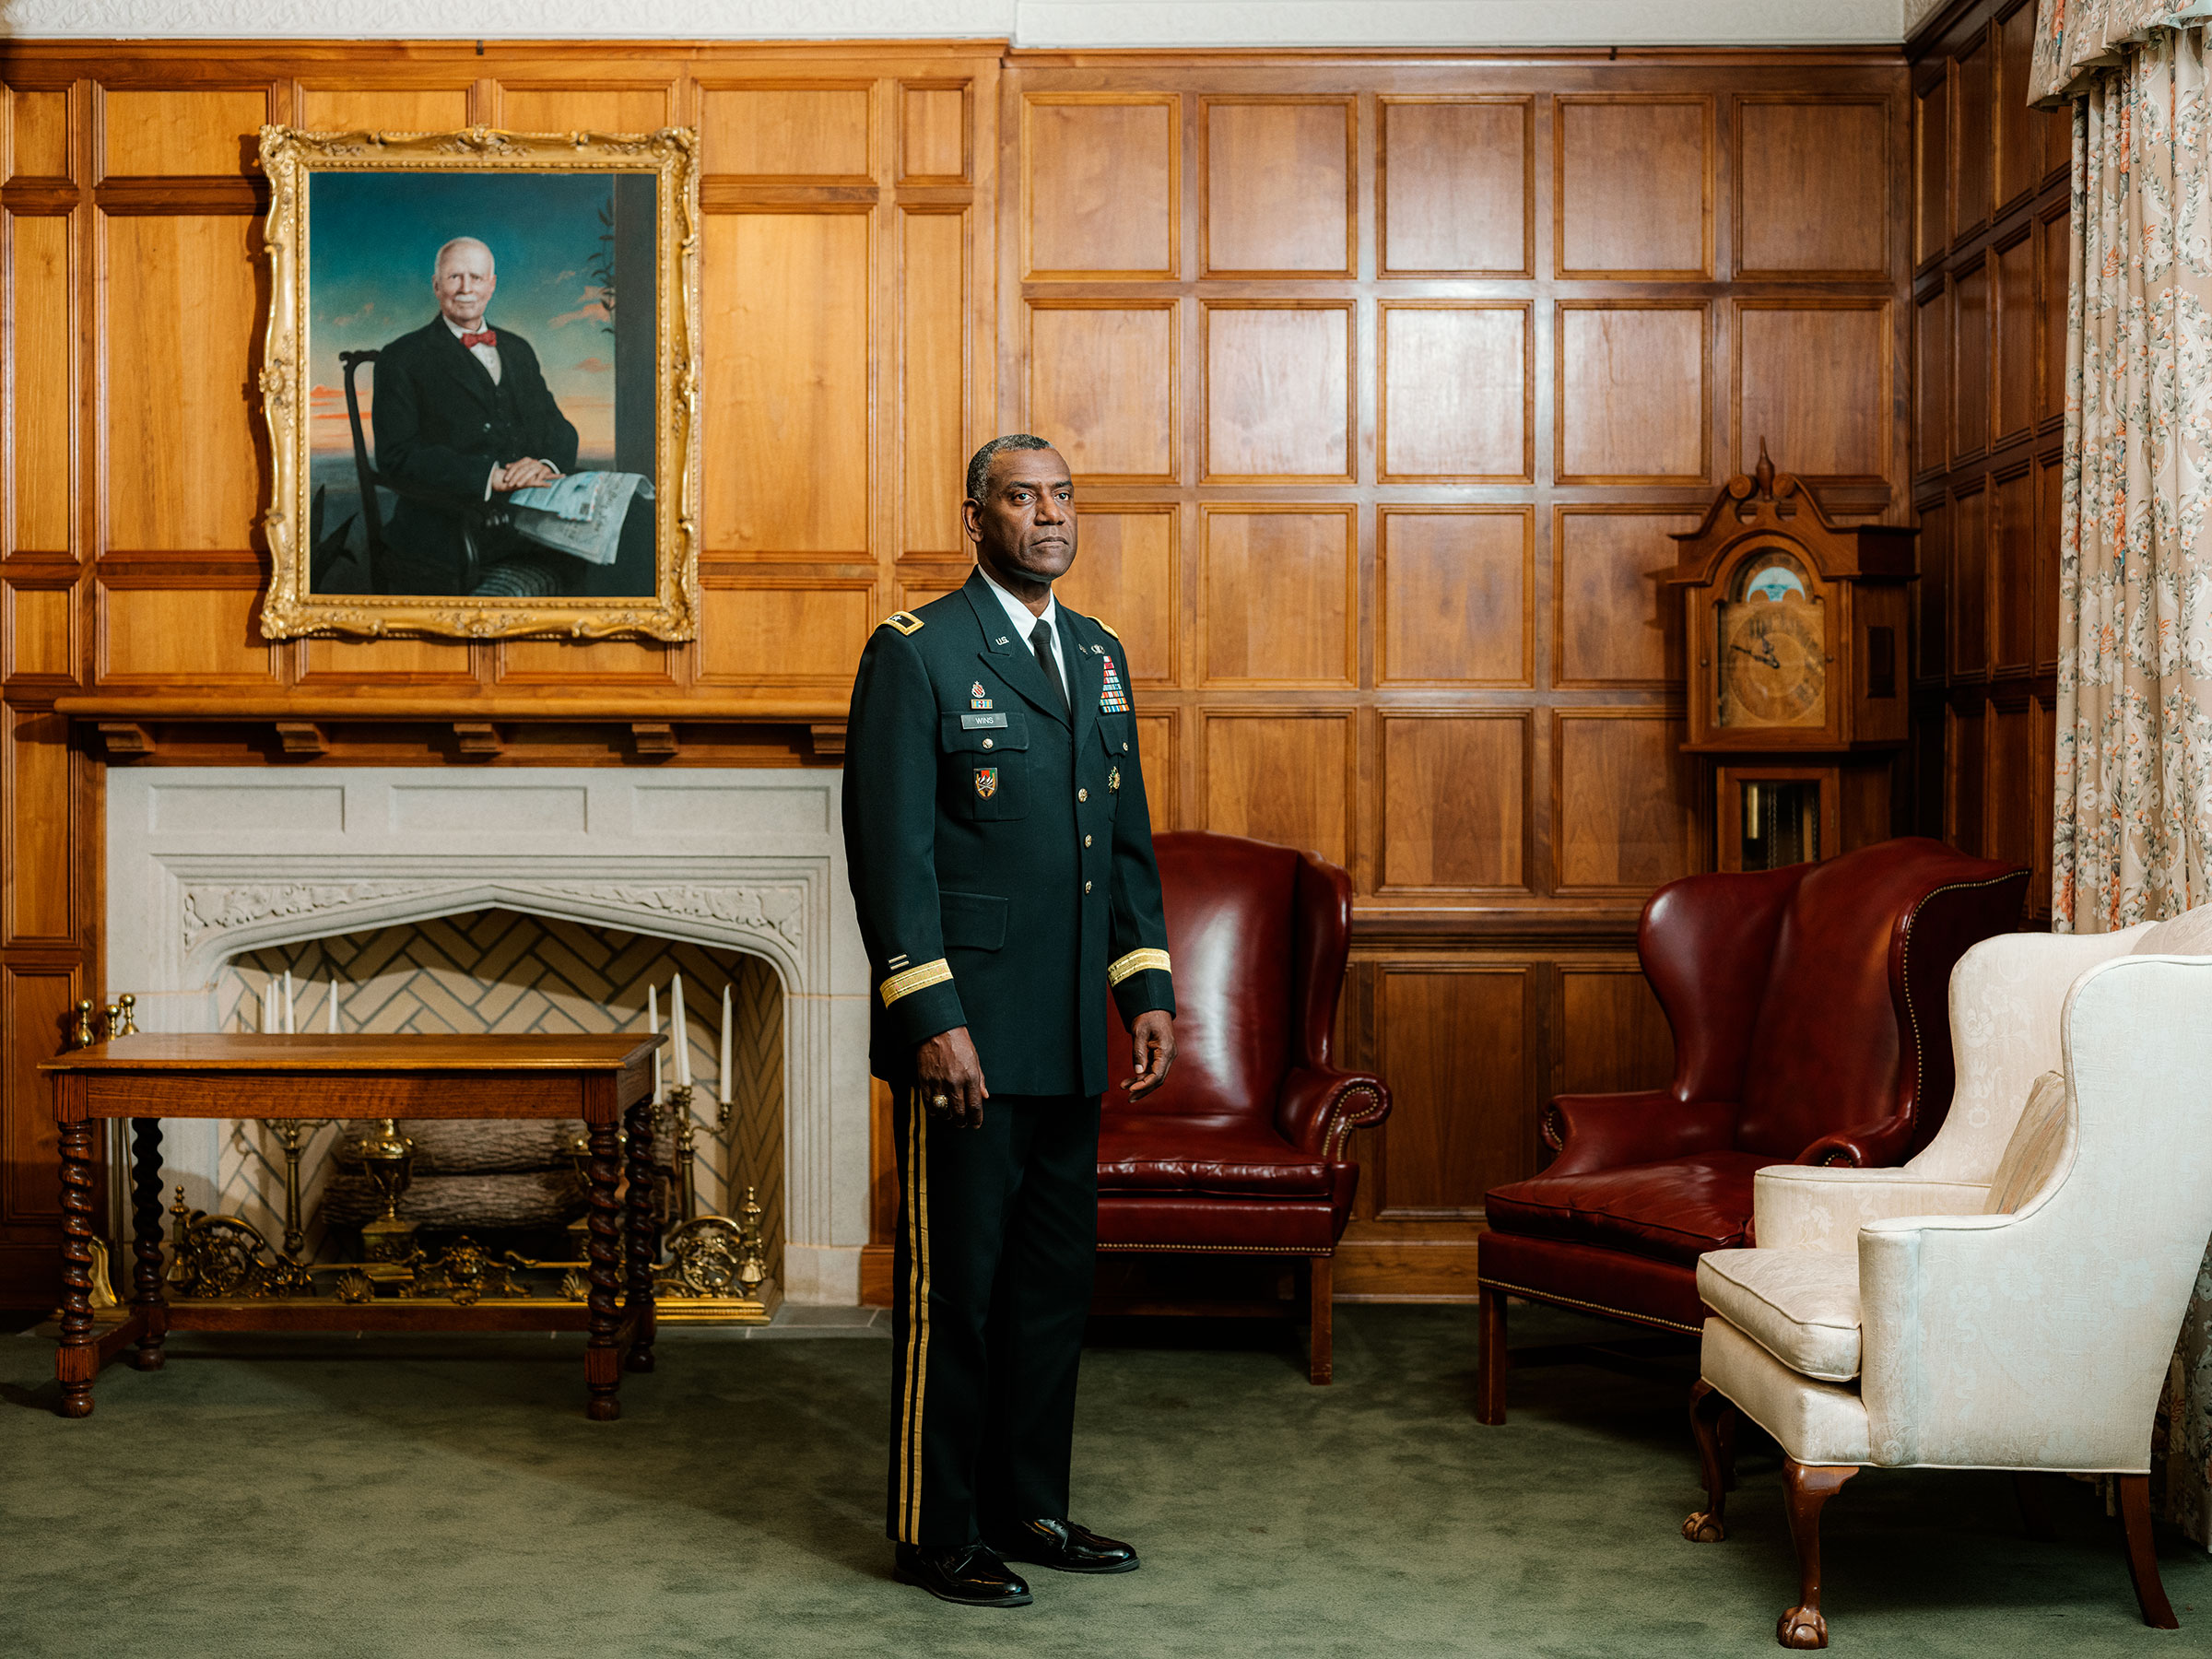 <strong>Major General Cedric Wins</strong>. "<a href="https://time.com/longform/virginia-military-institute-racial-awakening/">America's Racial Awakening Forces Virginia Military Institute To Confront Its Past—And Future</a>," June 7 issue. (Jared Soares for TIME)